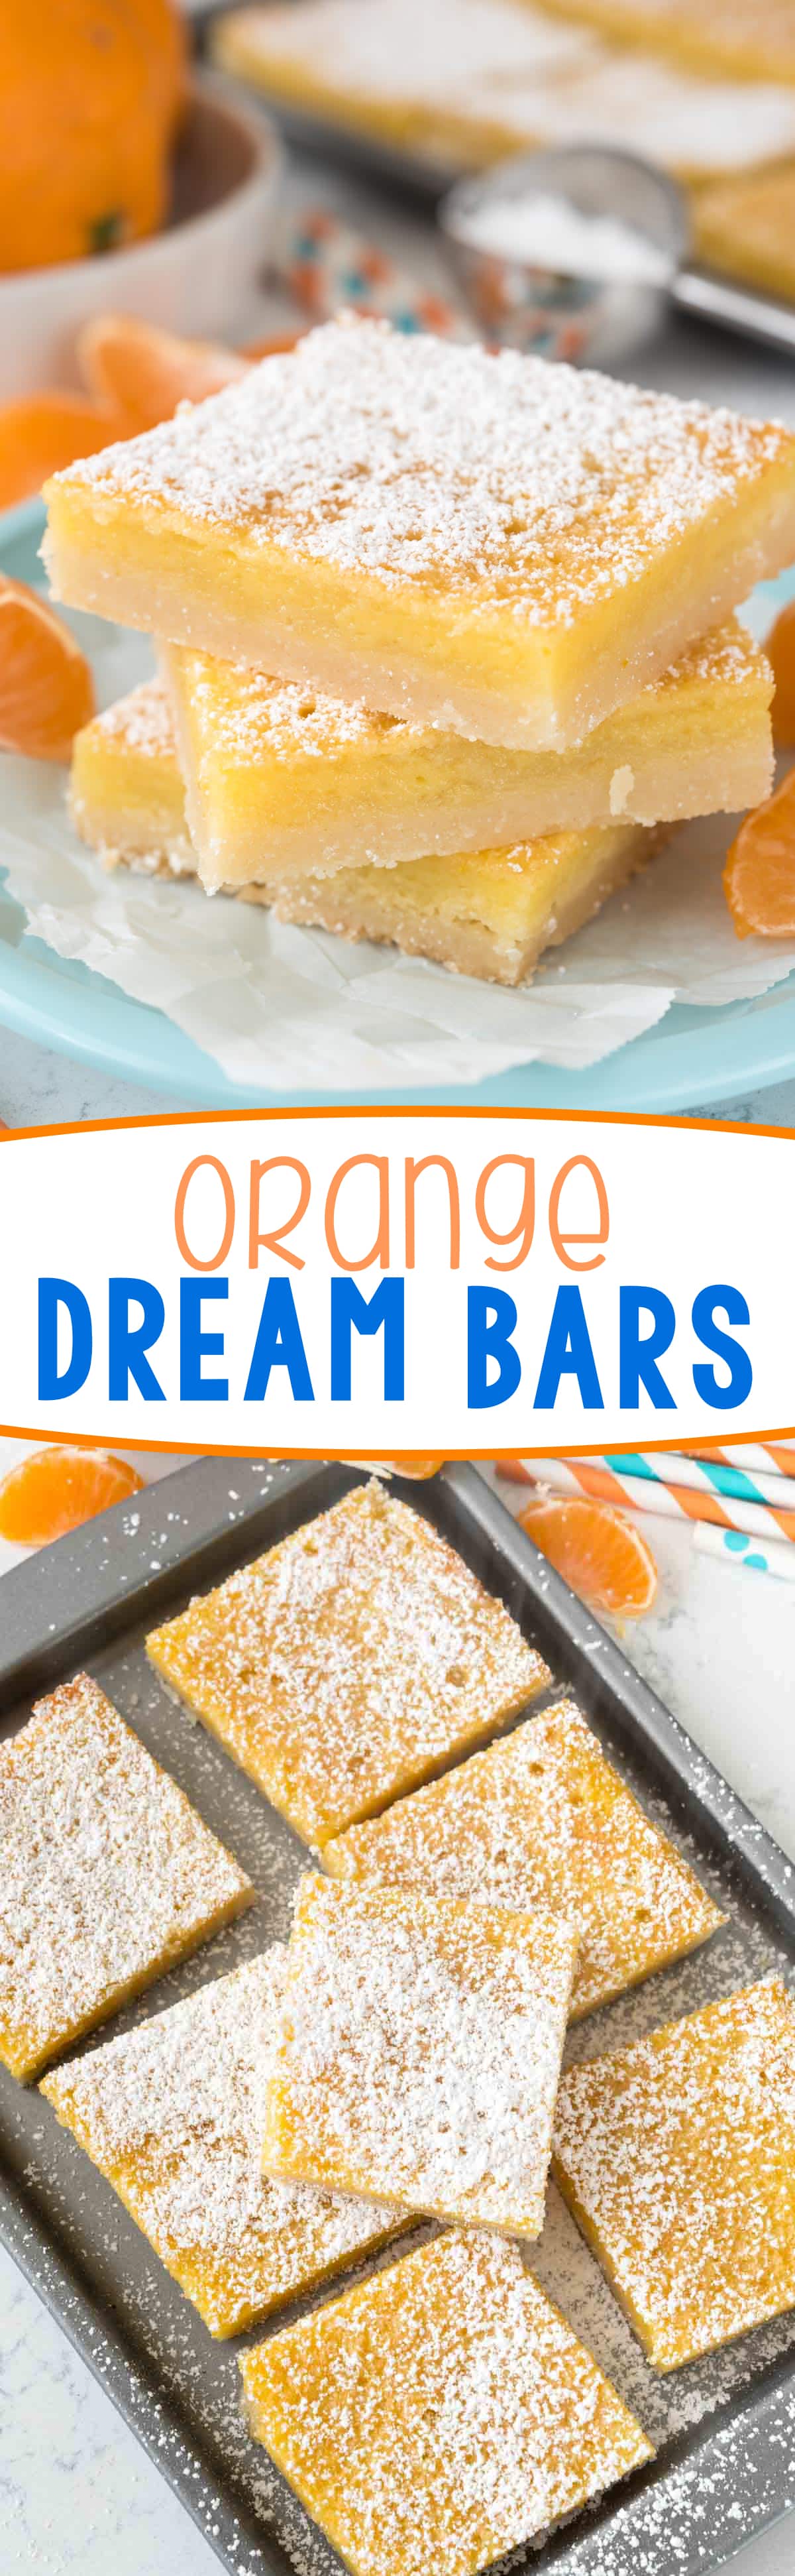 Orange Dream Bars - this easy recipe is like a lemon bar but using orange! The perfect citrus recipe, tart and sweet with a shortbread crust.